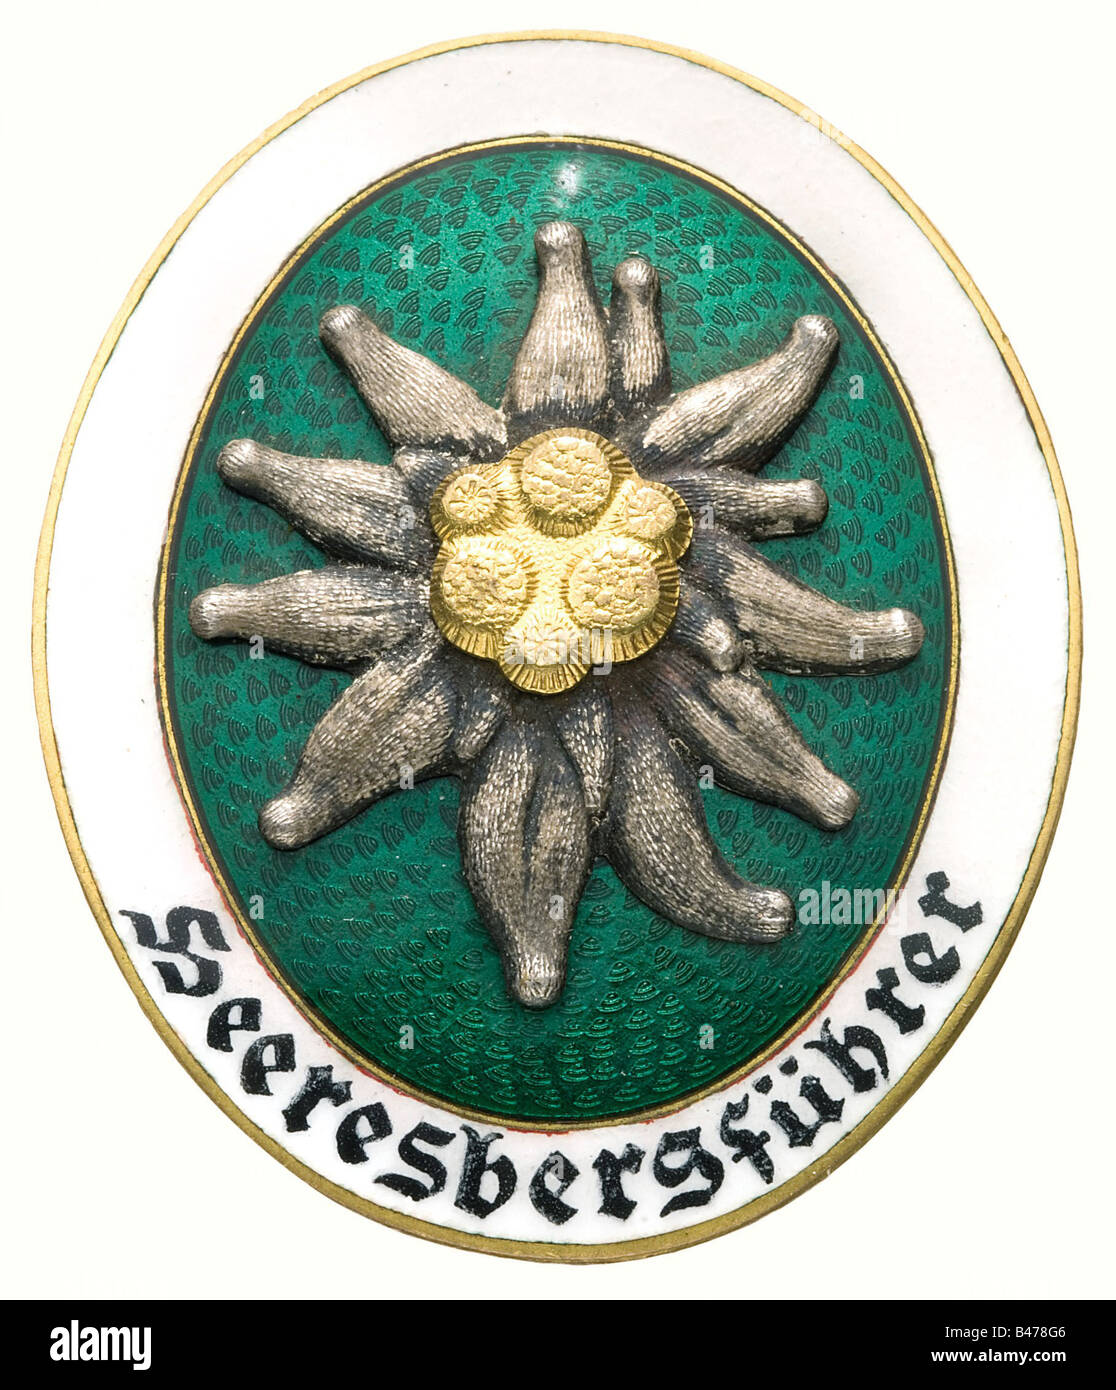 A German Army Mountain Guide Badge., Gilt, non-ferrous metal, the centre of translucent green enamel, white border with hand-painted script, riveted Edelweiss (the rivets repaired with small dots of solder). Vertical oval shape, manufacturer's mark 'Deschler & Sohn München' (OEK 3915/4). historic, historical, 1930s, 1930s, 20th century, awards, award, German Reich, Third Reich, Nazi era, National Socialism, object, objects, stills, medal, decoration, medals, decorations, clipping, cut out, cut-out, cut-outs, honor, honour, National Socialist, Nazi, Nazi period,, Stock Photo